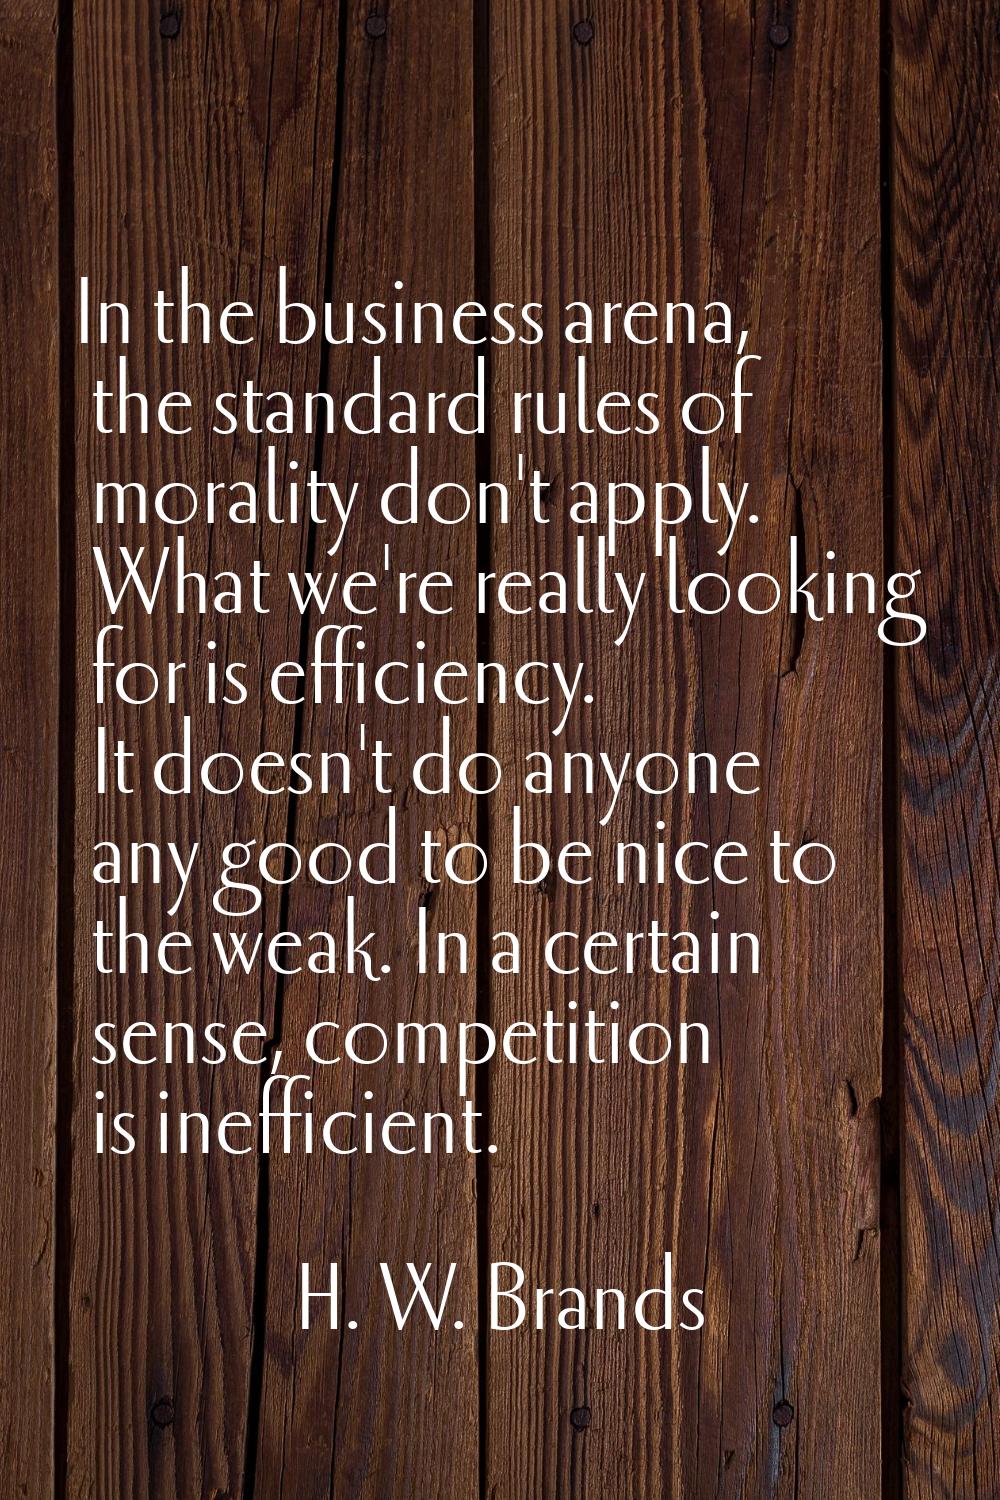 In the business arena, the standard rules of morality don't apply. What we're really looking for is